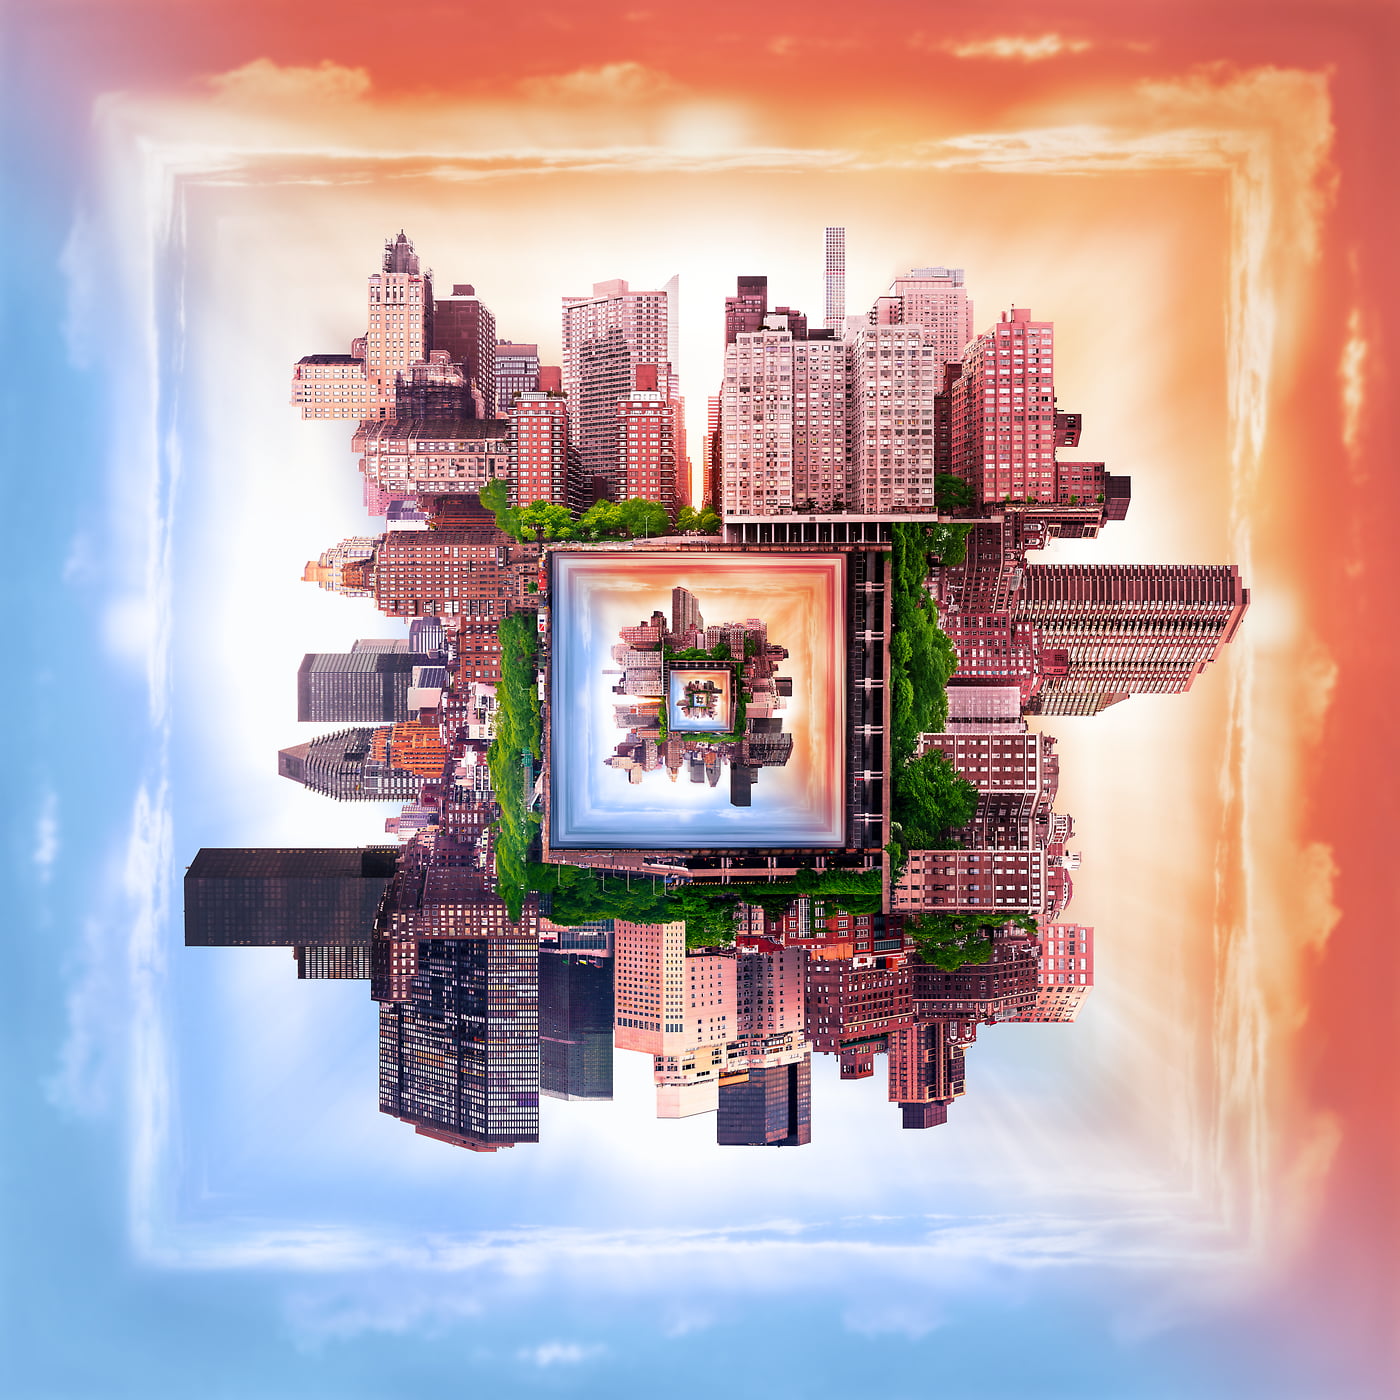 2,204 megapixels! A very high resolution, large-format VAST photo print of a surreal city in a square shape; artistic fine art skyline photo created by Dan Piech in Midtown East, Manhattan, New York City.